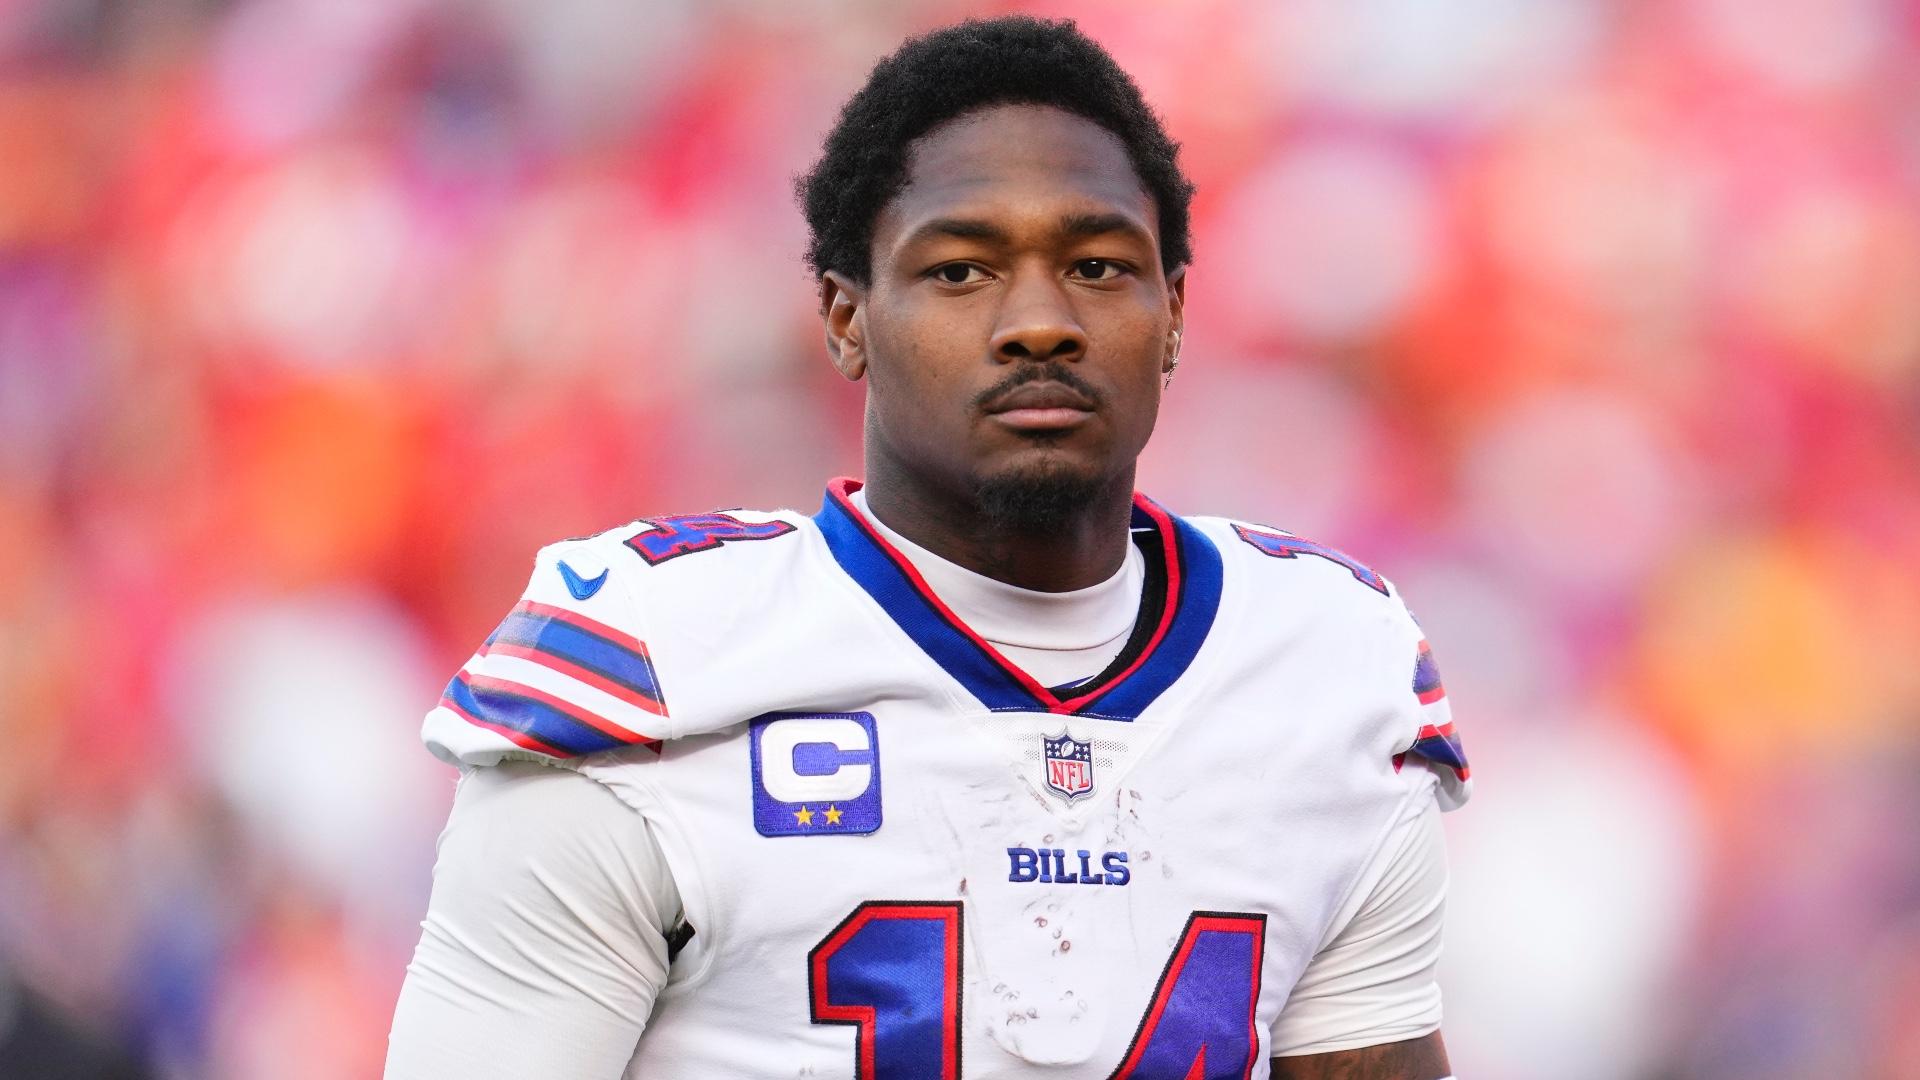 “why he choose to leave Bills today? NFL announcement as Stefon Diggs….see more